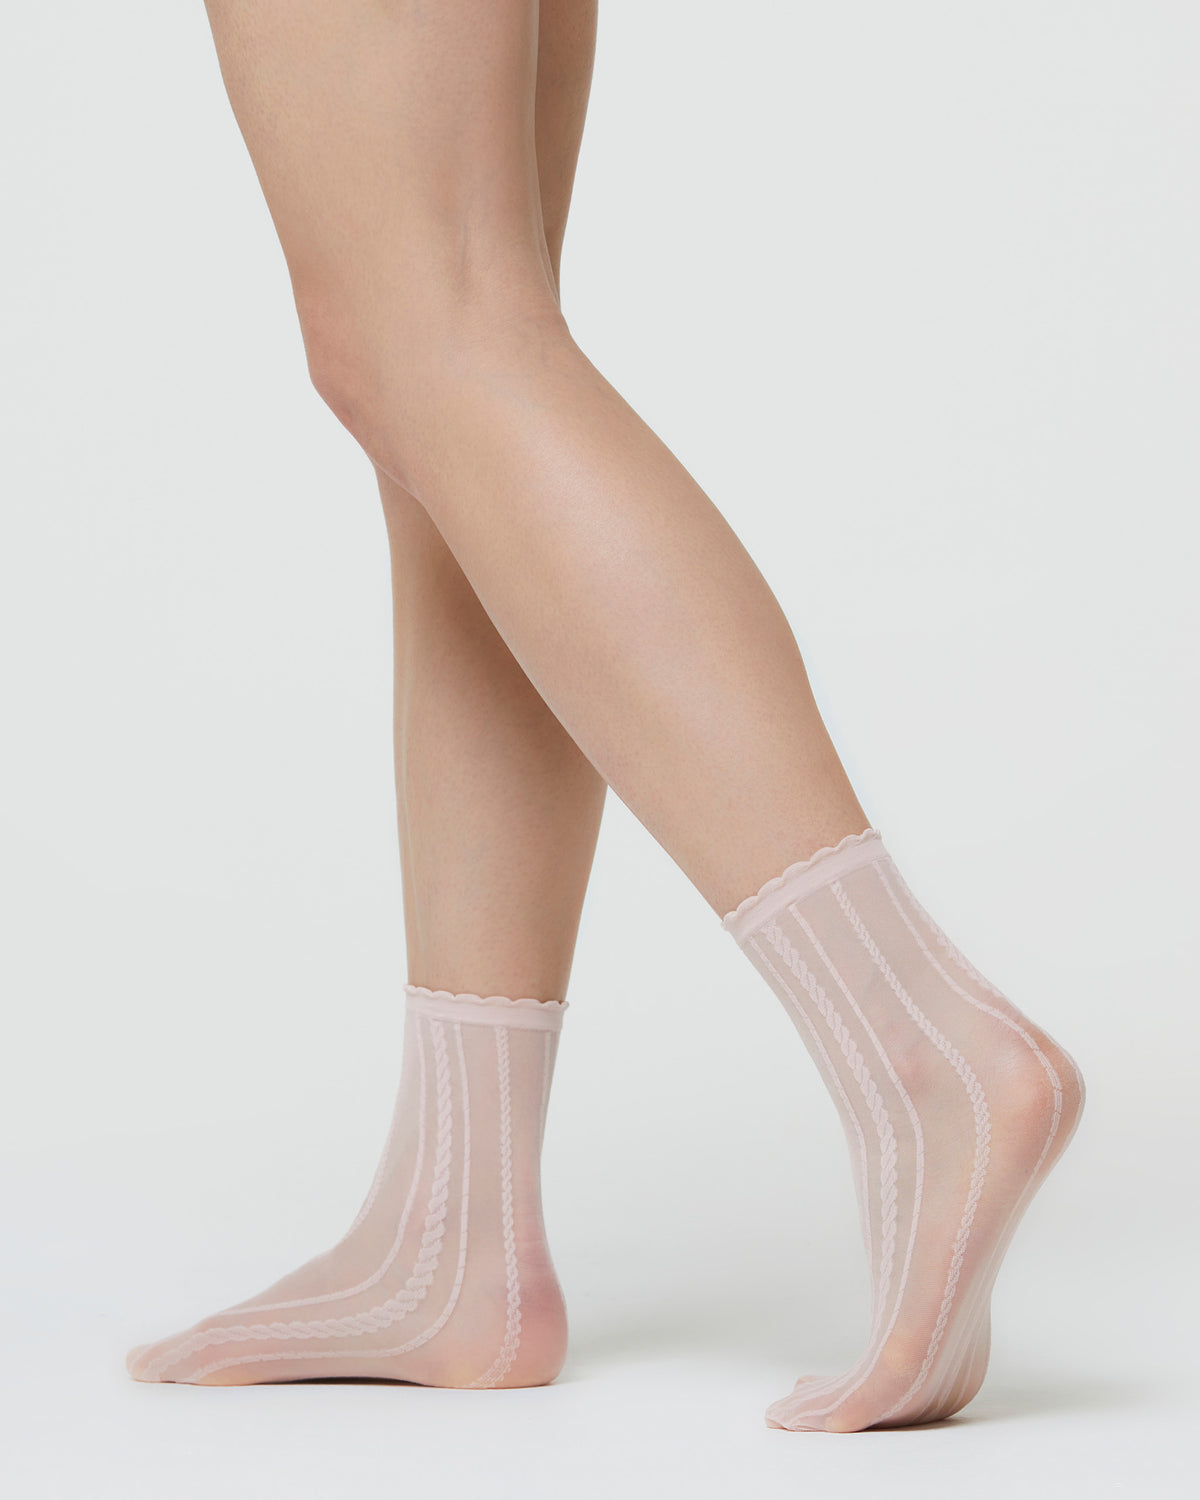 SUSAN SHEER SOCK WITH TRICOT EFFECT